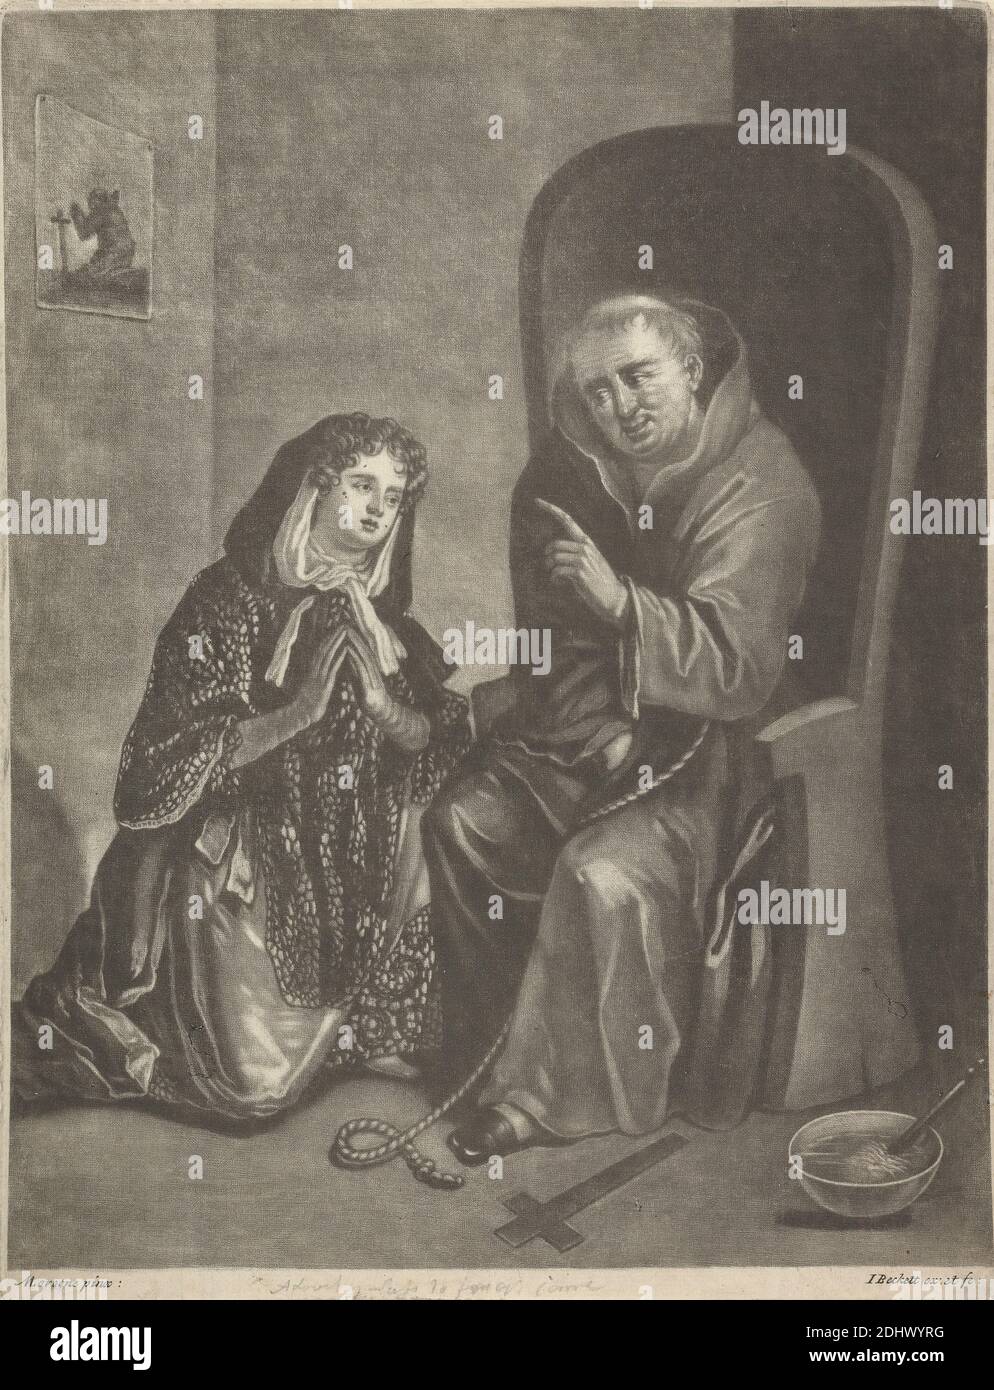 The Confession, Print made by Isaac Beckett, 1652/3–1719, British, after Marcellus Laroon the Elder, 1653–1702, Dutch, active in Britain (from ca. 1660), between 1681 and 1688, Mezzotint on medium, moderately textured, cream laid paper, Sheet: 10 1/2 × 8 1/16 inches (26.6 × 20.5 cm) and Image: 10 1/16 x 7 7/8 inches (25.5 x 20 cm), bowl (vessel), chair, cloak, commentary, confession, cross (object), crucifix, curls, genre subject, gesture, hands, interior, kneeling, listening, man, masturbation, monk, painting (visual work), parody, pattern (design element), pointing, praying, religious Stock Photo